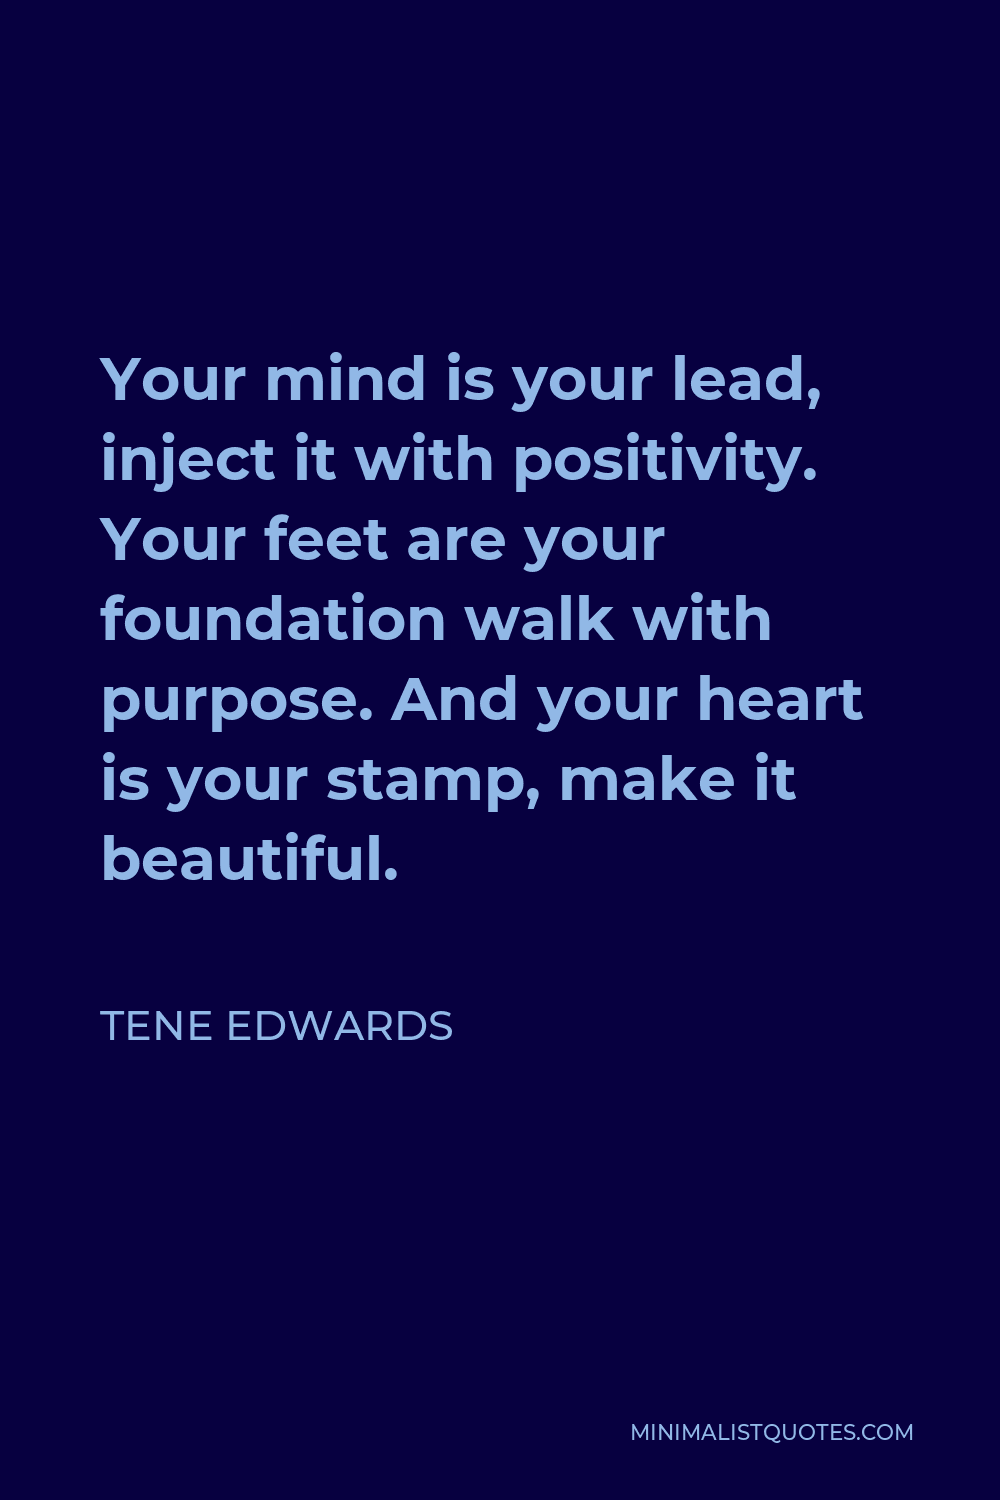 Tene Edwards Quote - Your mind is your lead, inject it with positivity. Your feet are your foundation walk with purpose. And your heart is your stamp, make it beautiful.